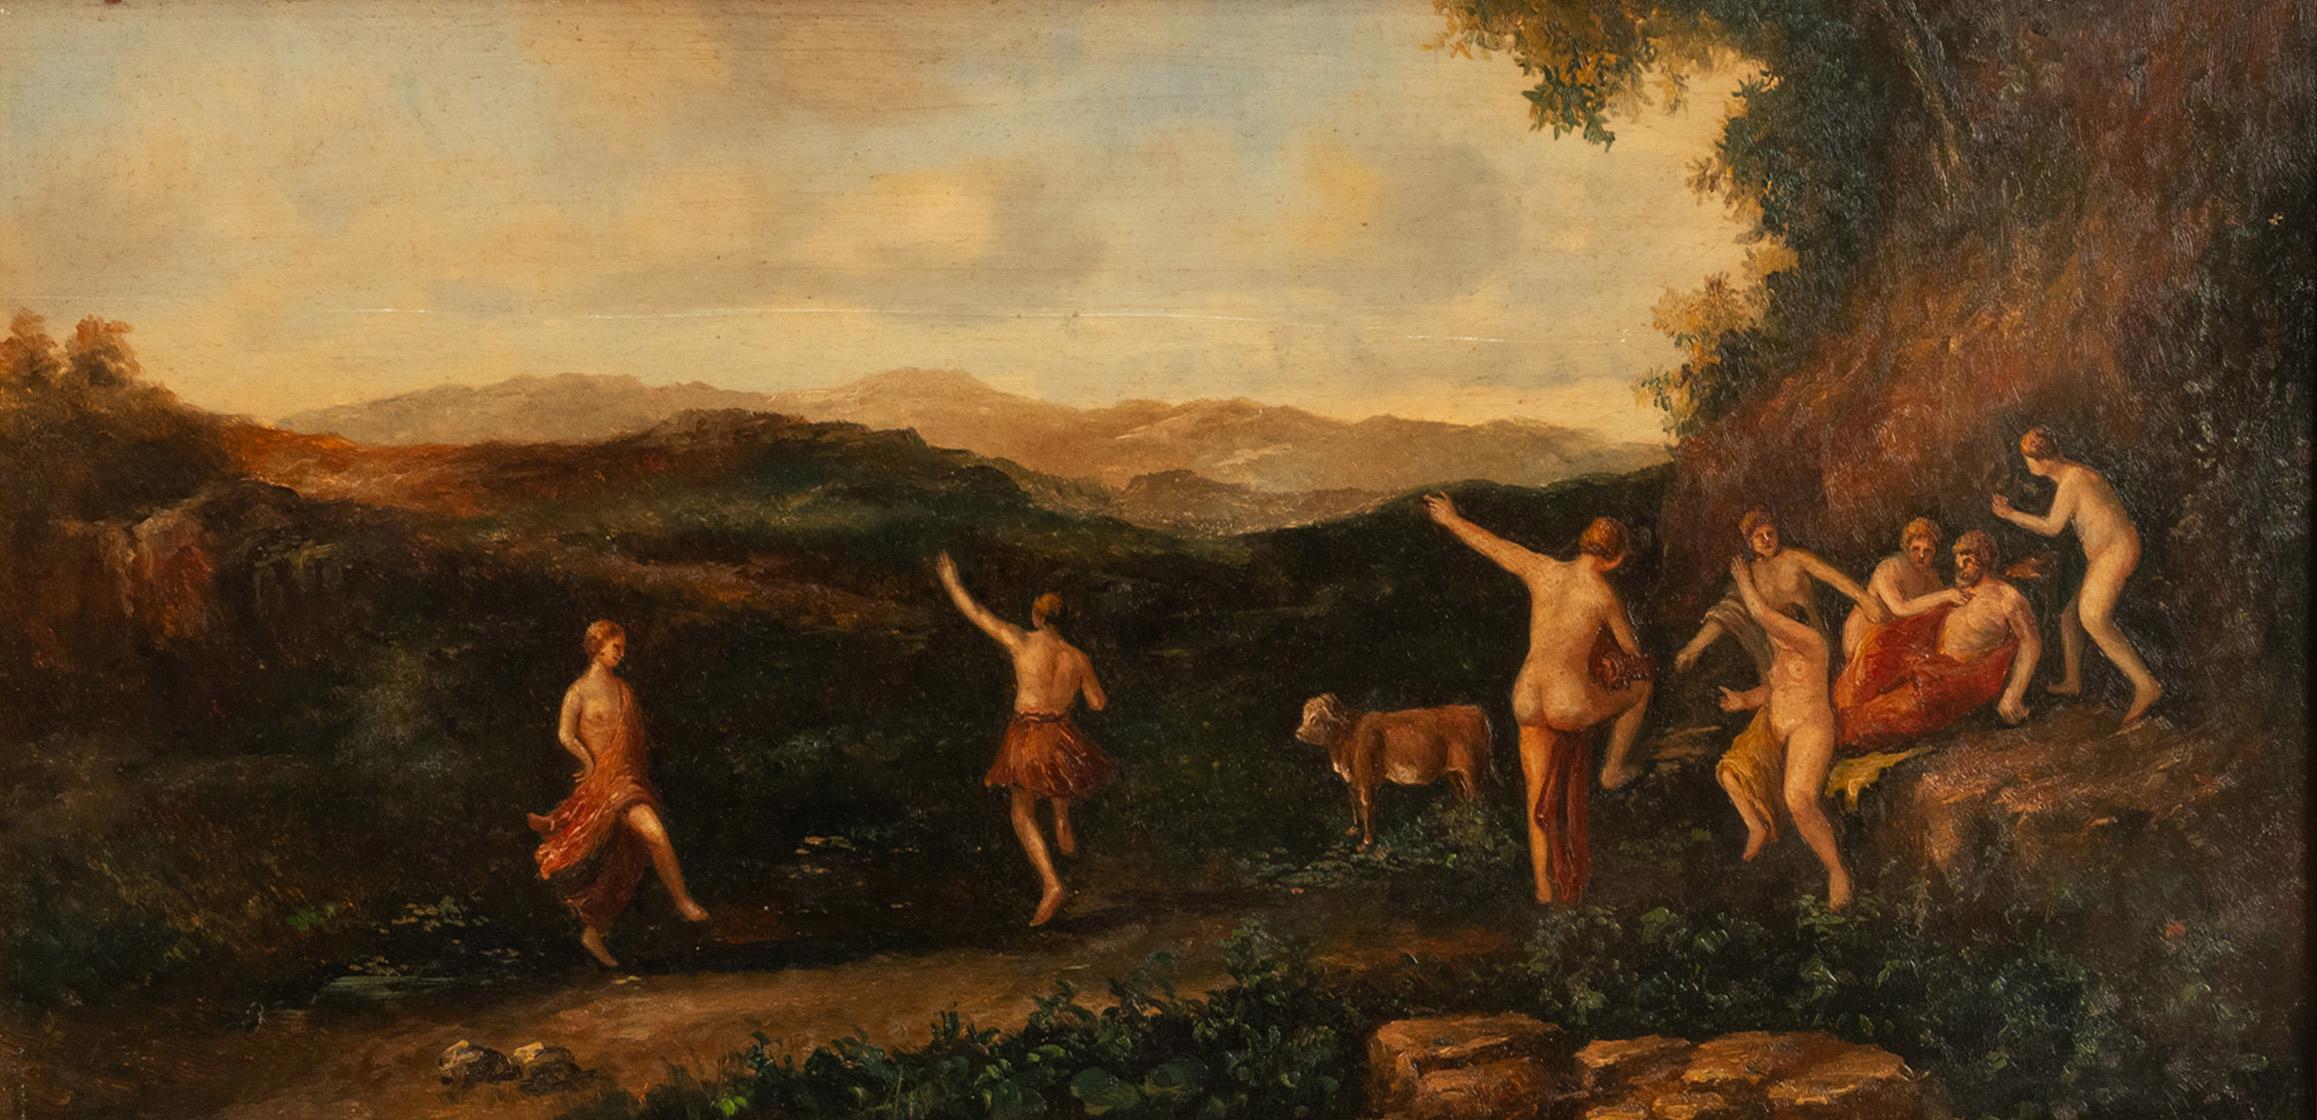 A good antique Dutch/Flemish oil on panel painting, after Cornelis van Poelenburgh, circa 1850.
The painting portrays a number of nude and partially robed nymphs dancing in a bucolic landscape, with a cow to the foreground on the painting.  
The